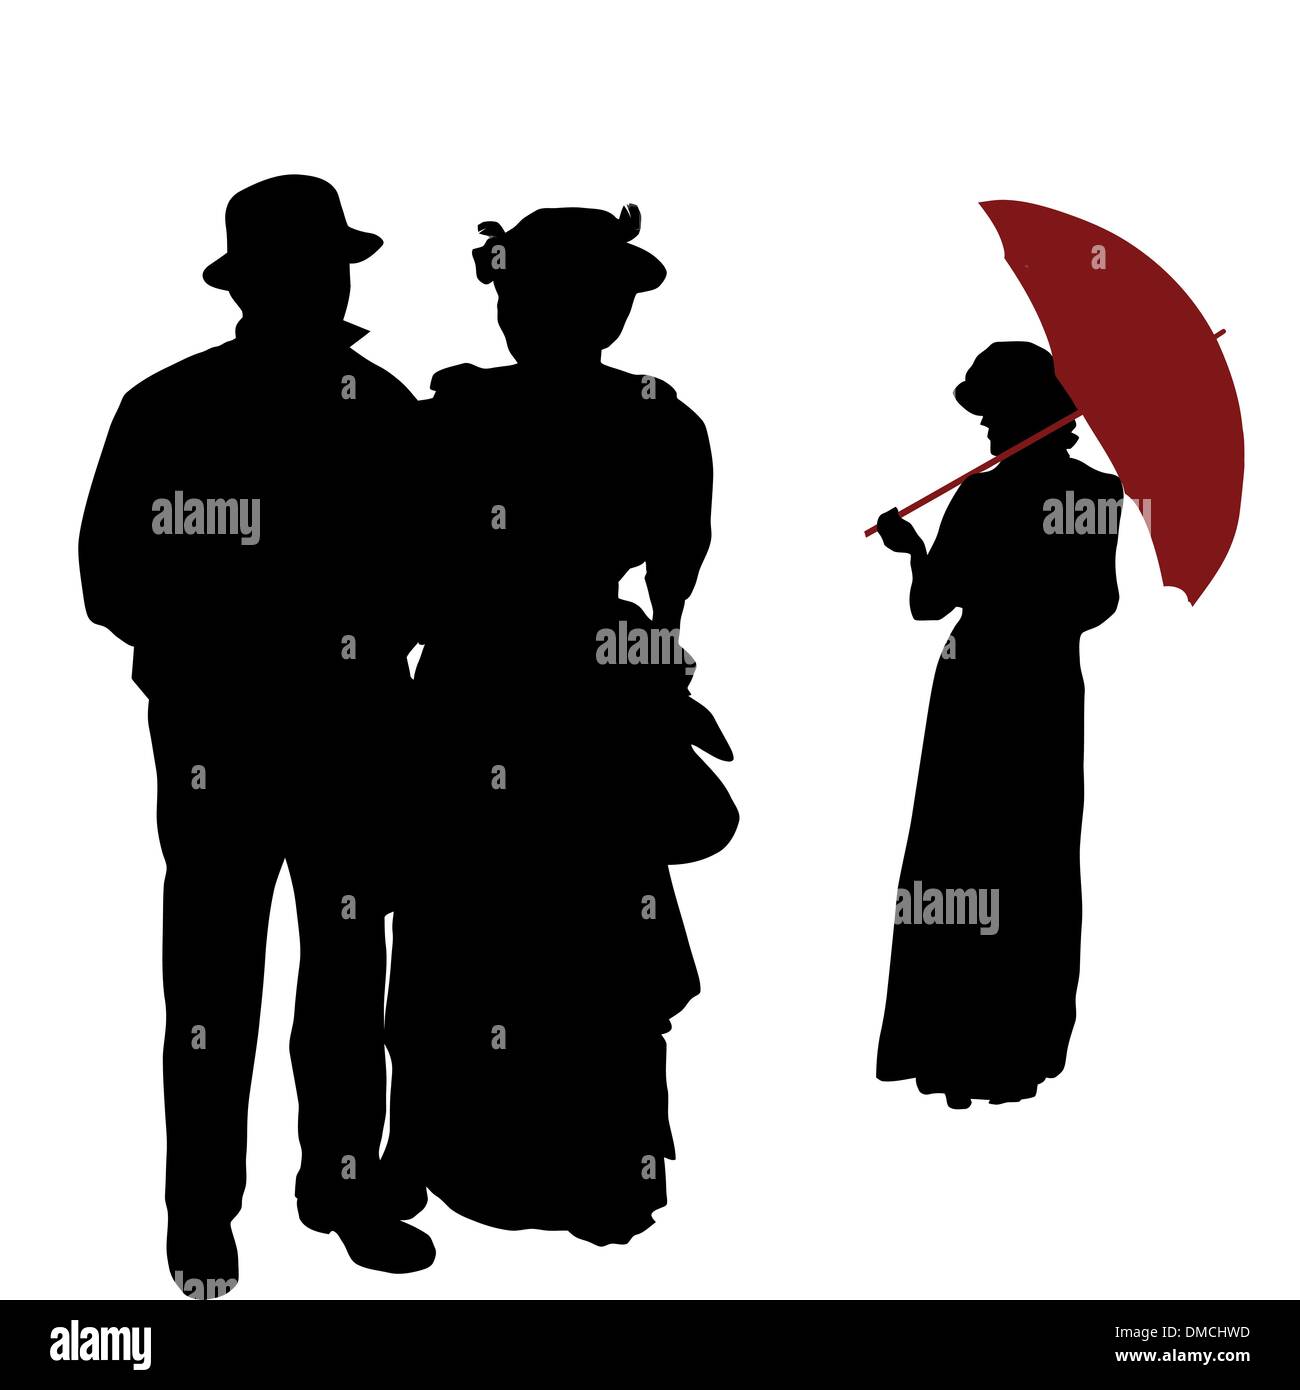 Vintage people silhouettes Stock Vector